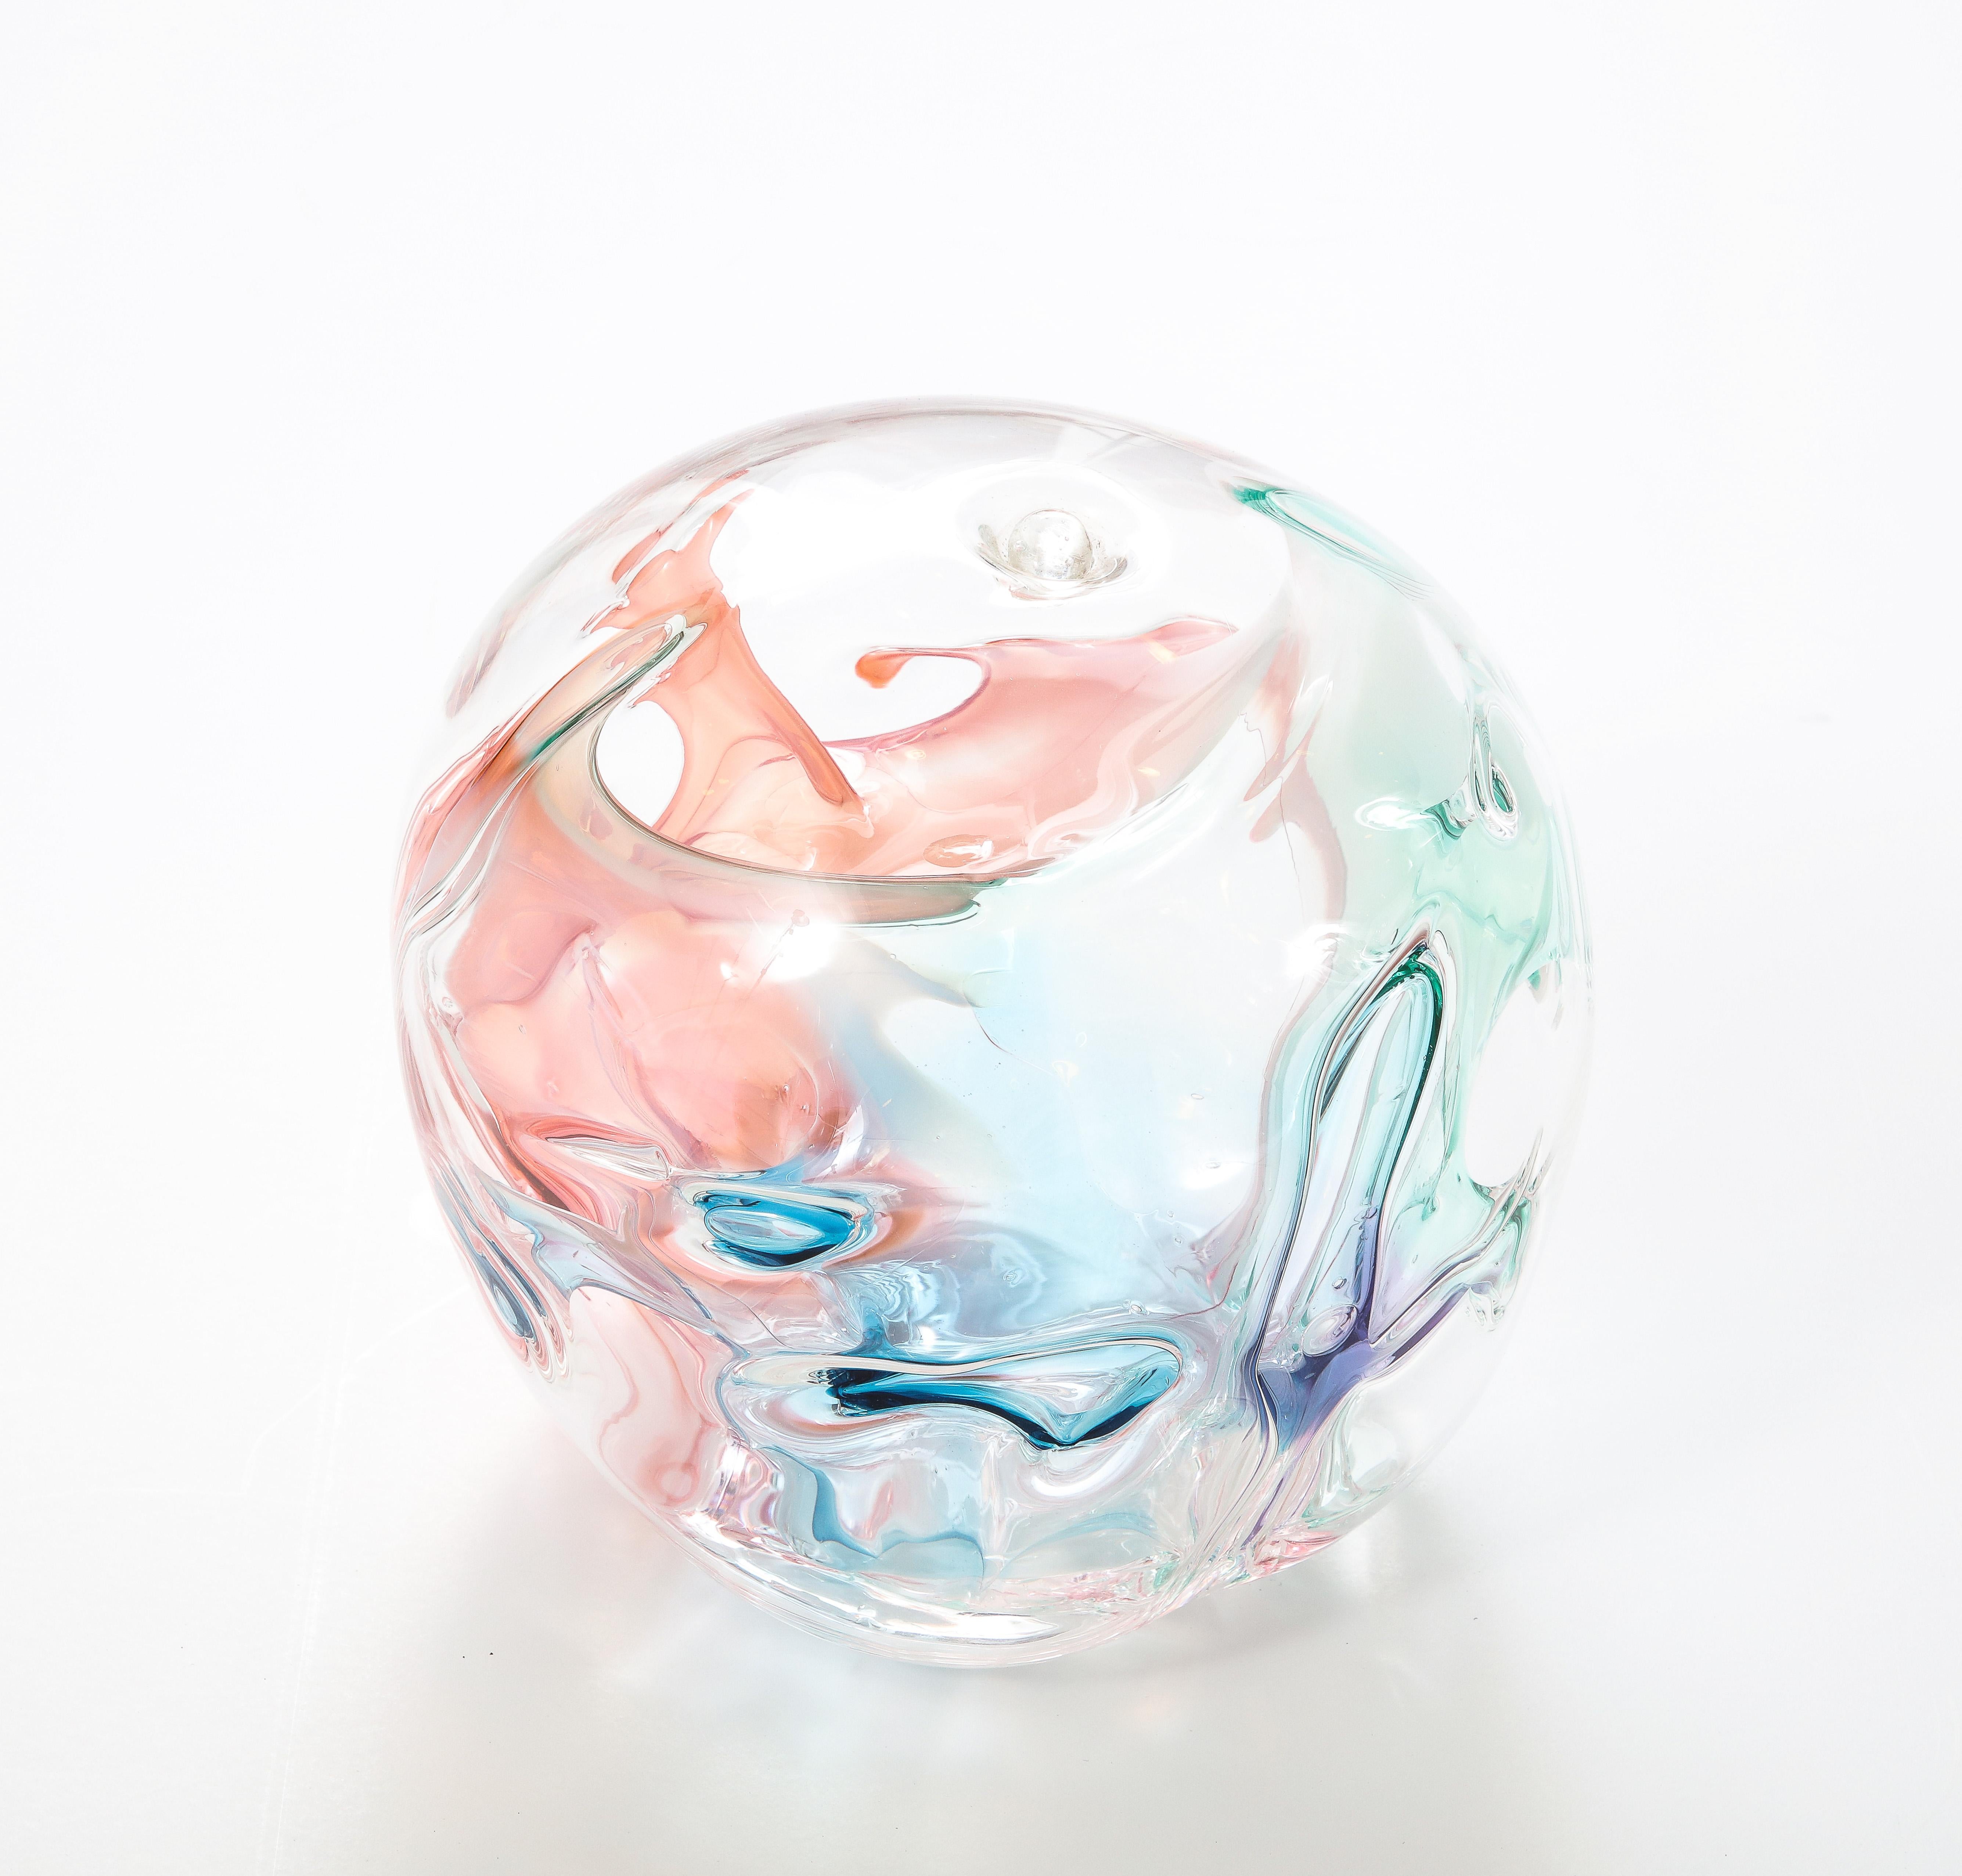 Peter Bramhall clear glass orb sculpture with internal glass threads in
pastel shades of Blue, Pink and Green.
The piece is signed and dated on the bottom.